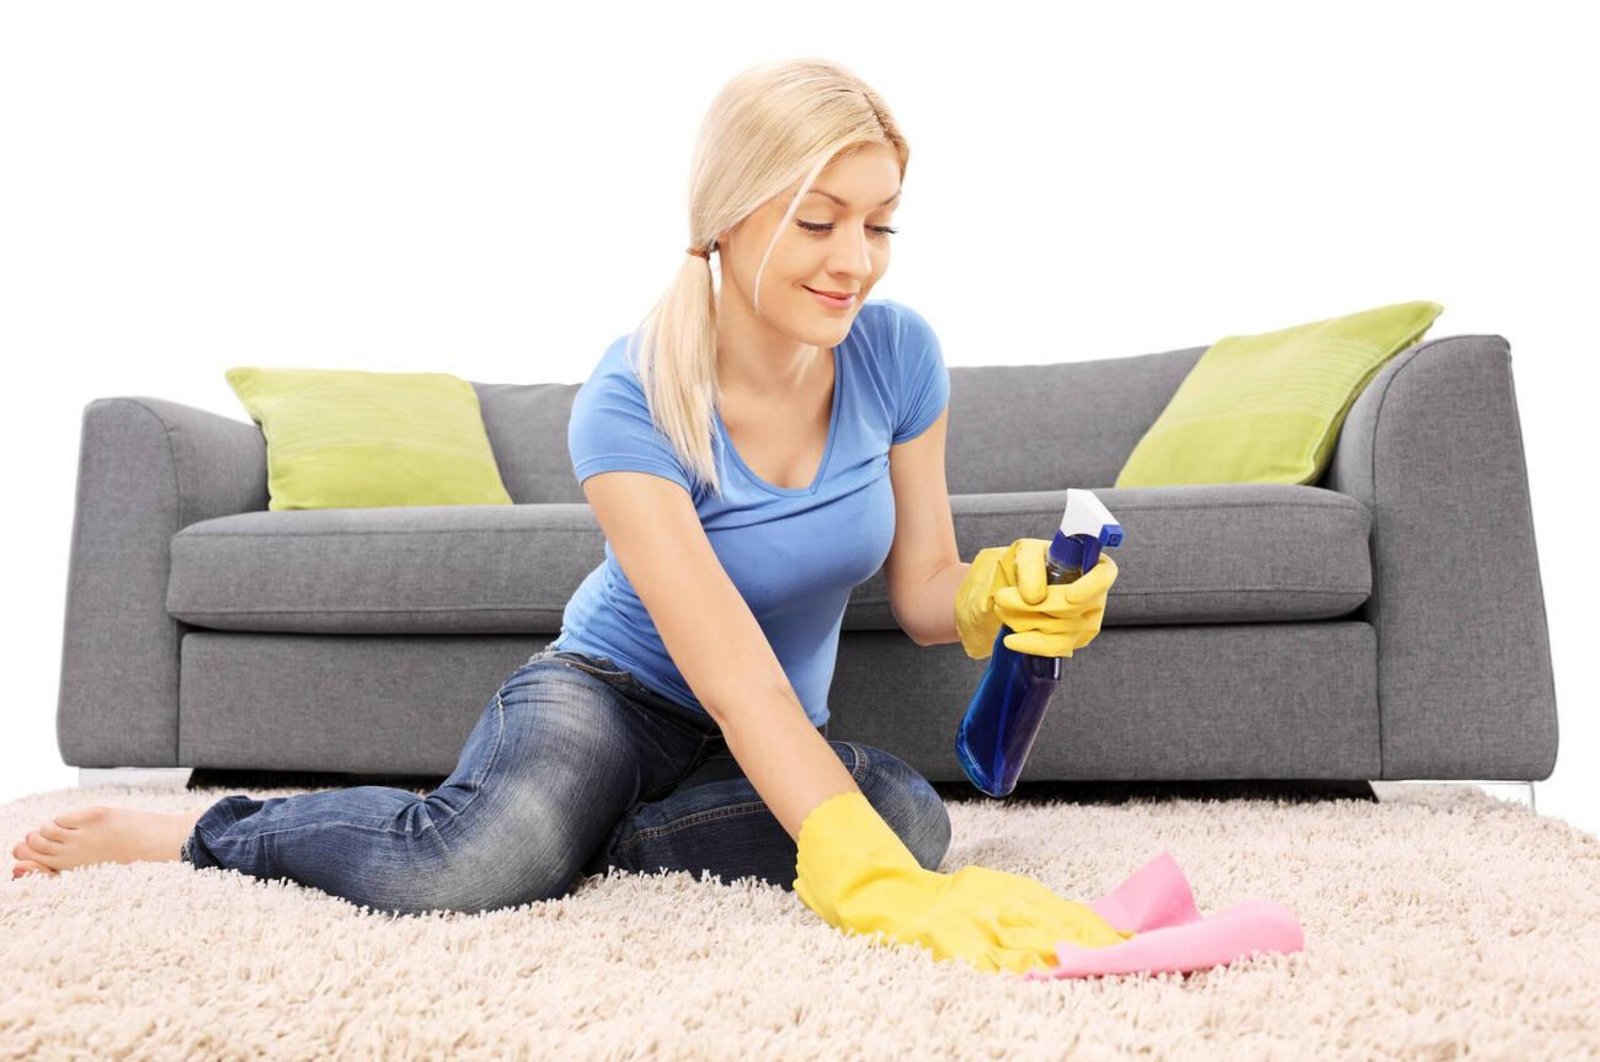 Top-Rated Carpet Cleaner Sprays for Deep Cleaning